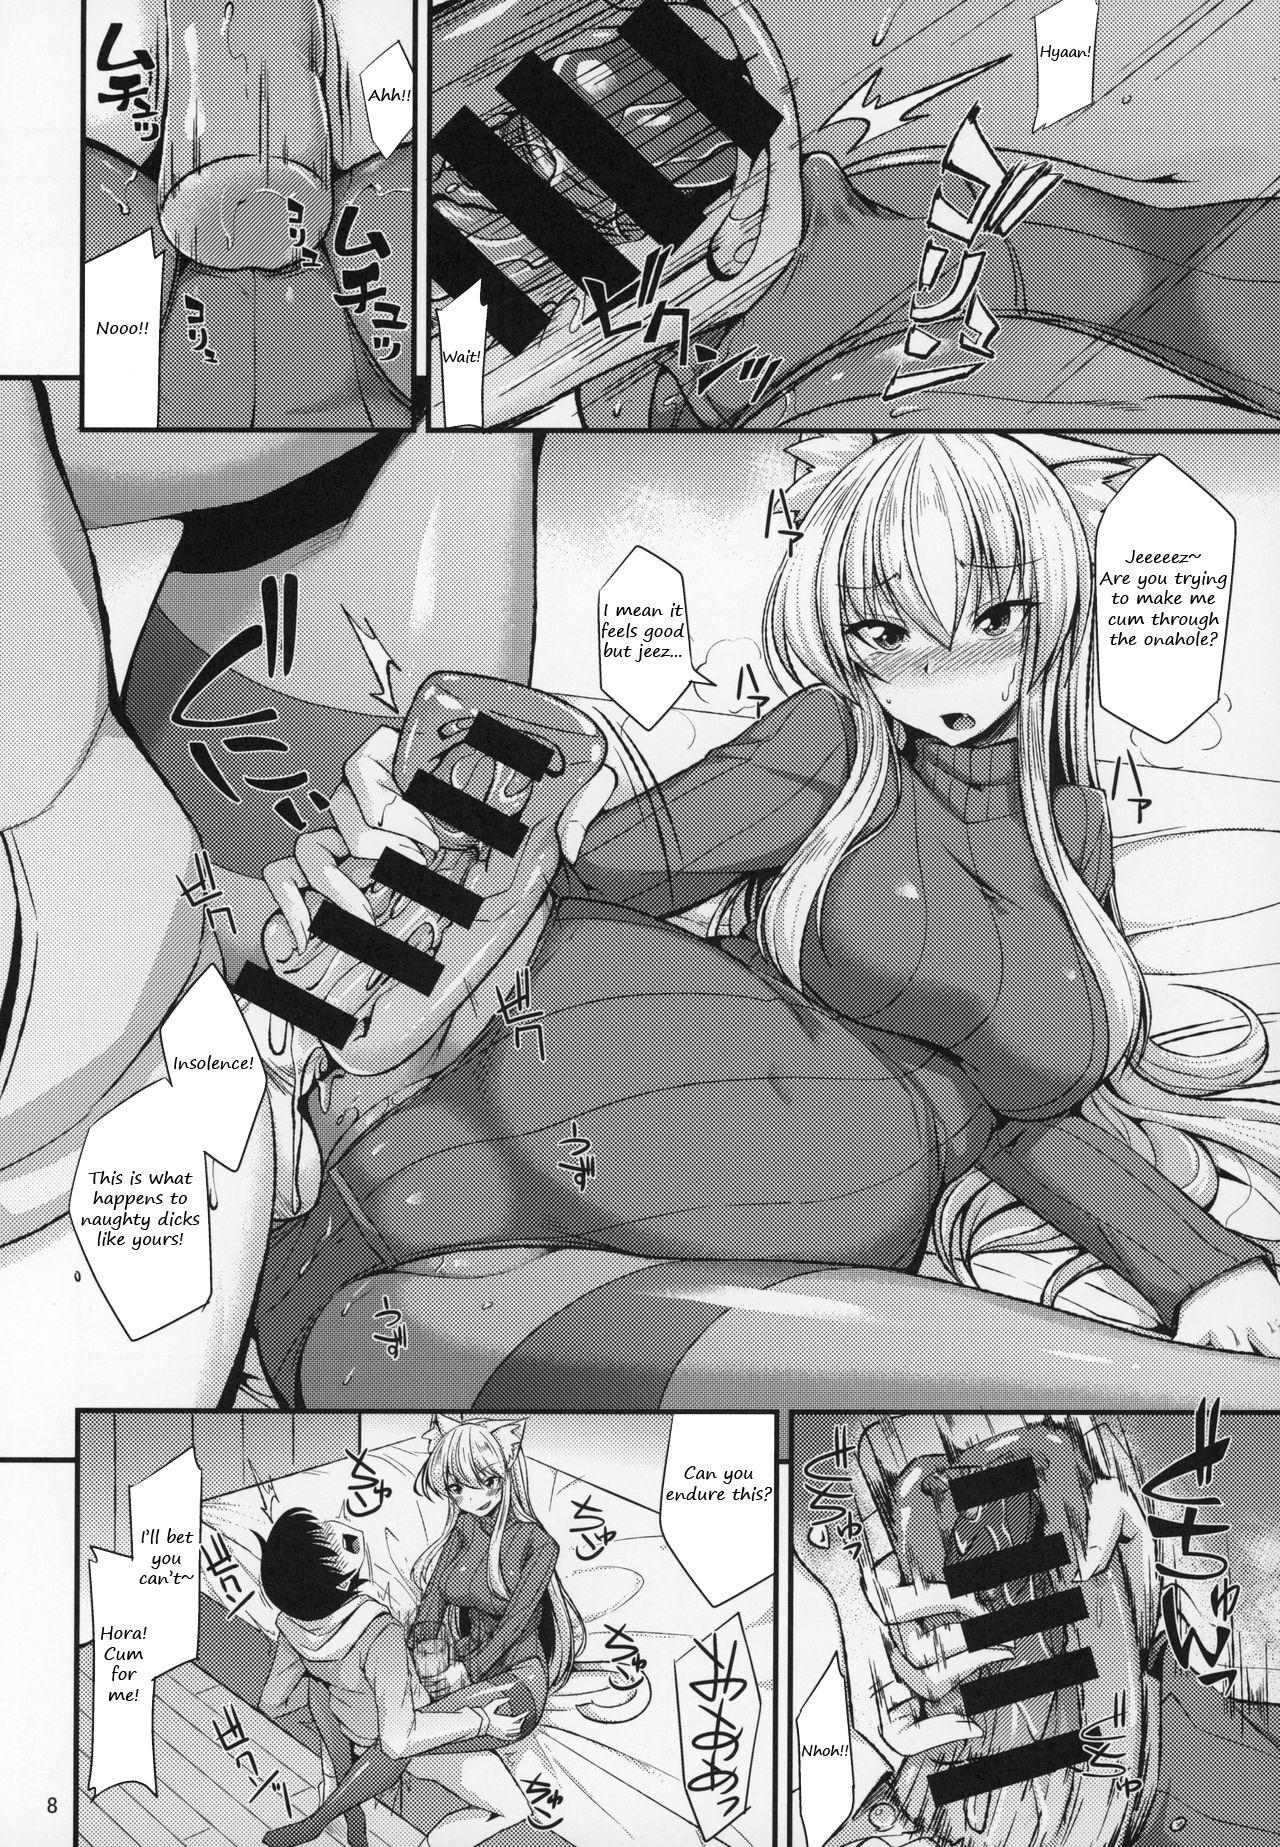 Missionary Position Porn (C97) [ENNUI (Nokoppa)] Nekomimi Onee-san to Onaho de Nyan Nyan | The cat-eared Onee-san and the Onahole [English] - Original Gay Money - Page 9